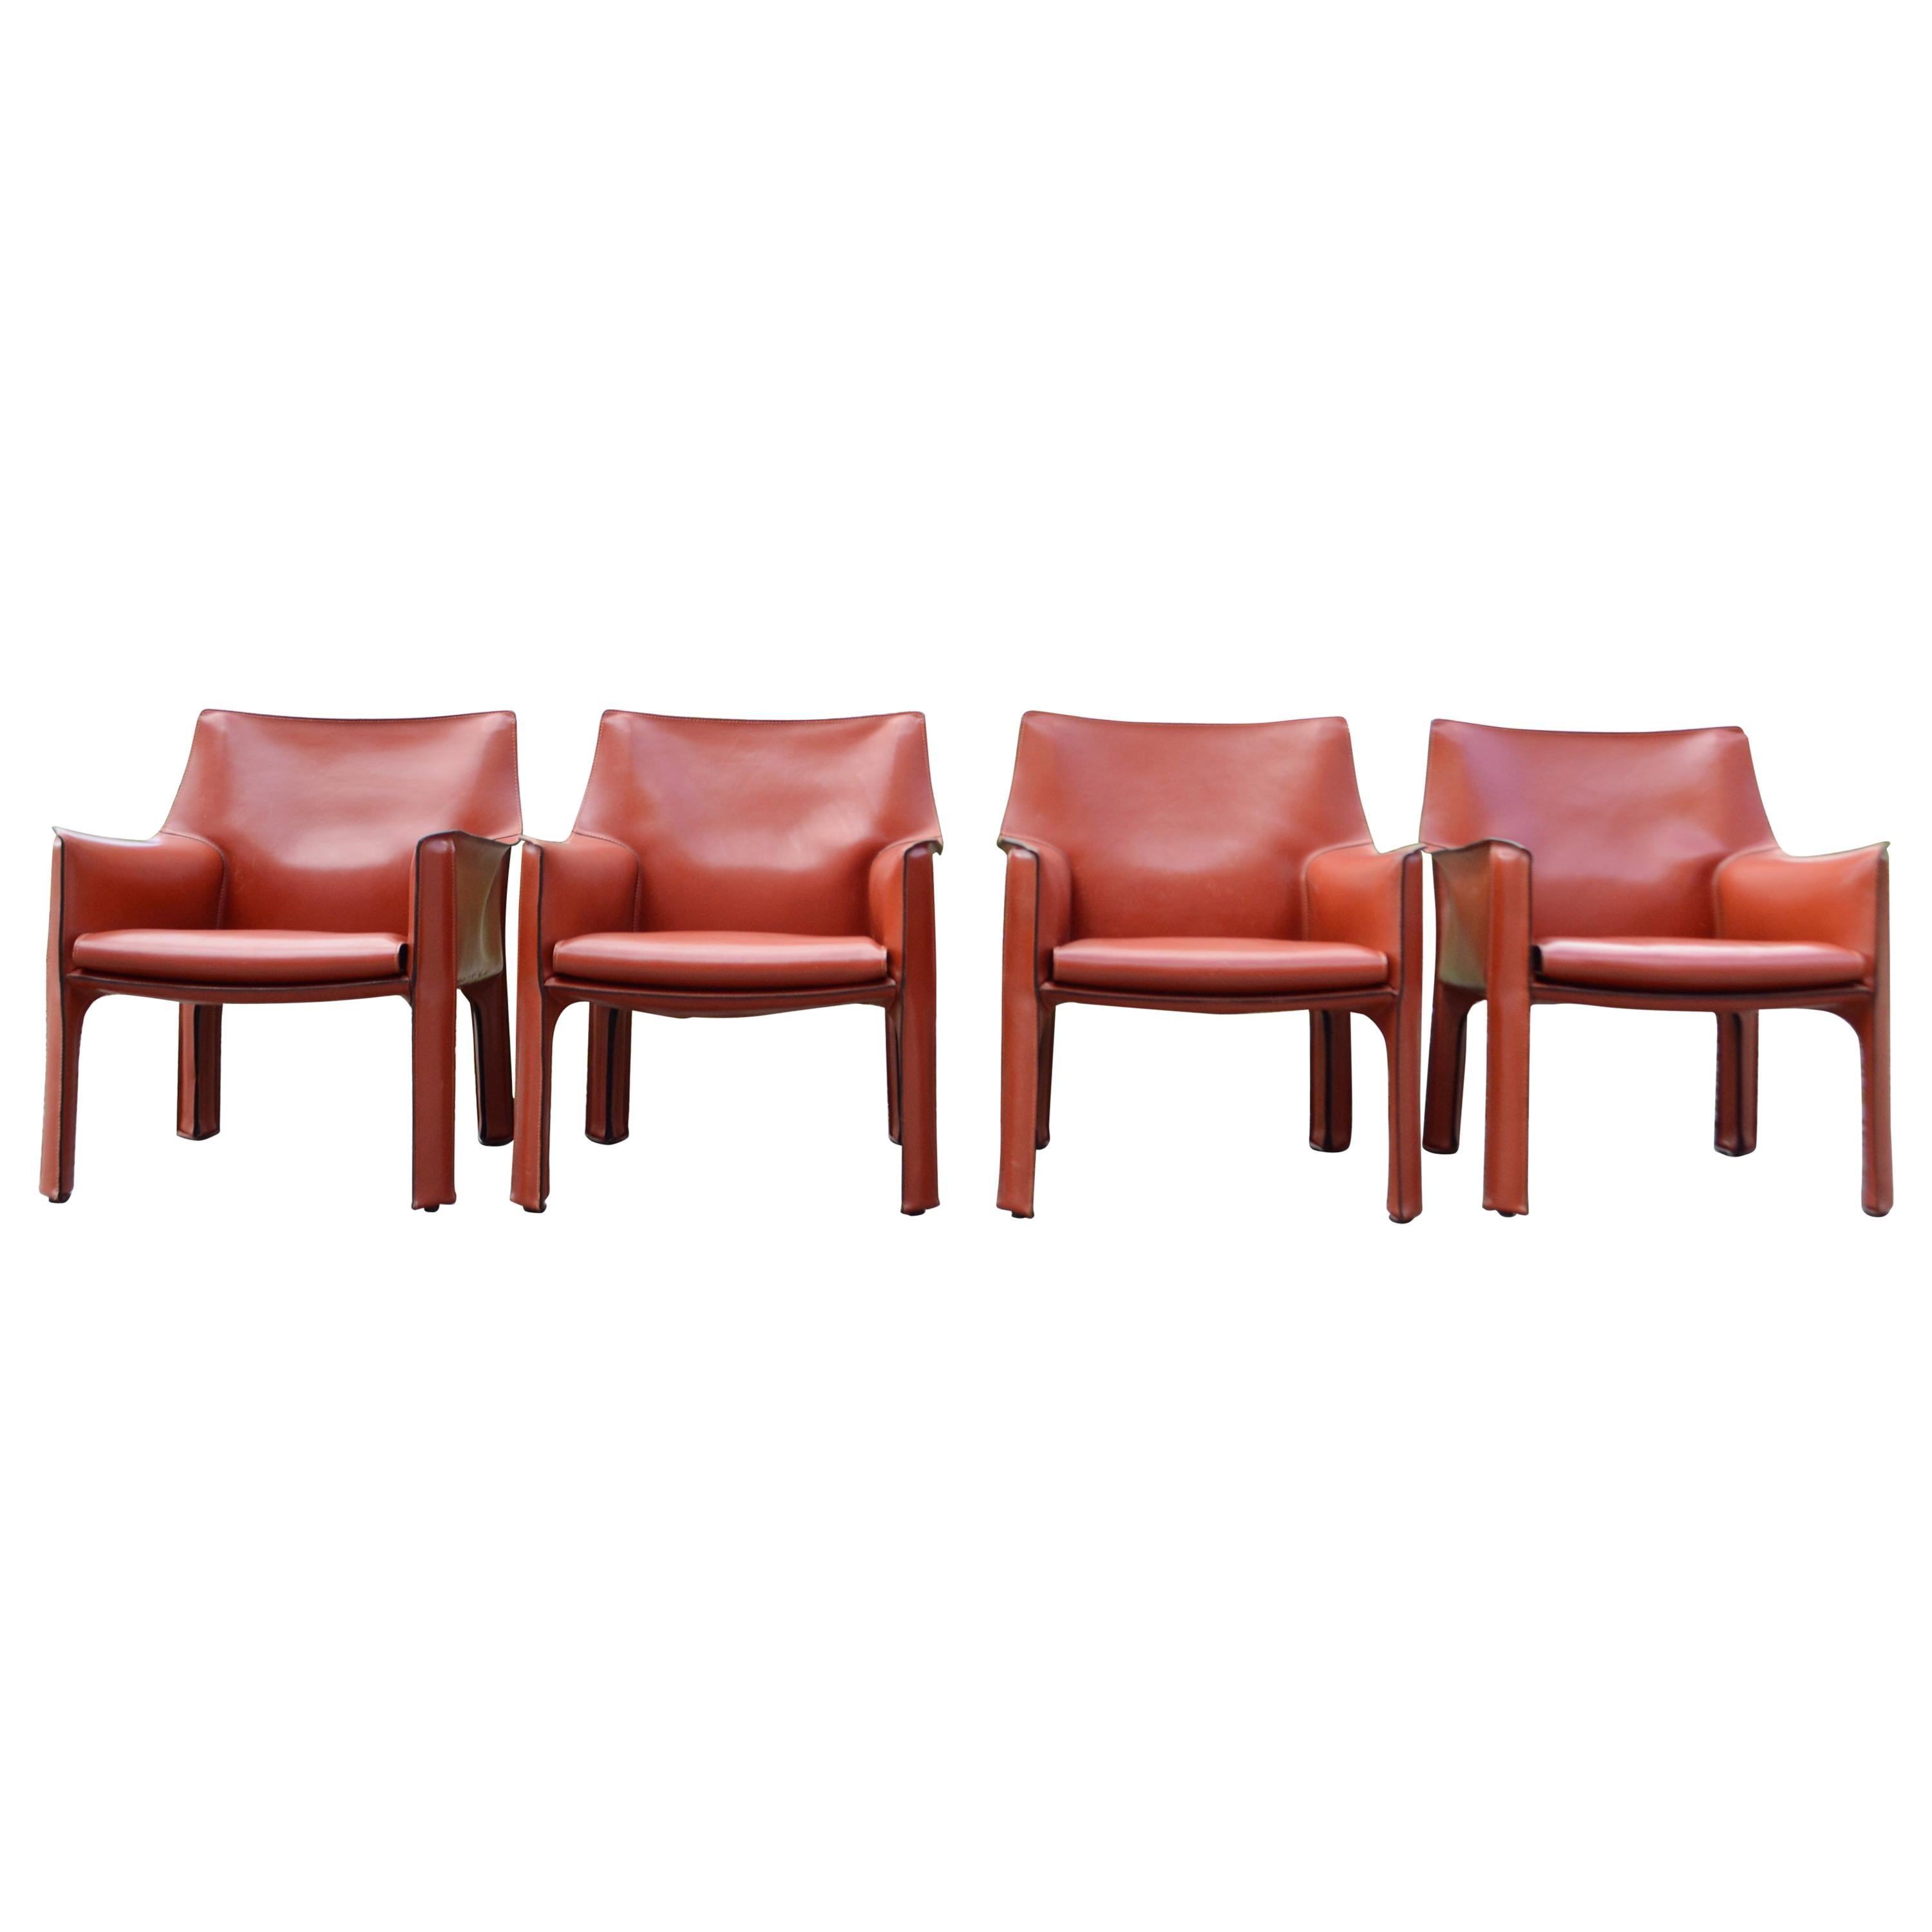 Cassina Cab 414 Leather Lounge Chair Armchair China Red / Ox Red Set of 4